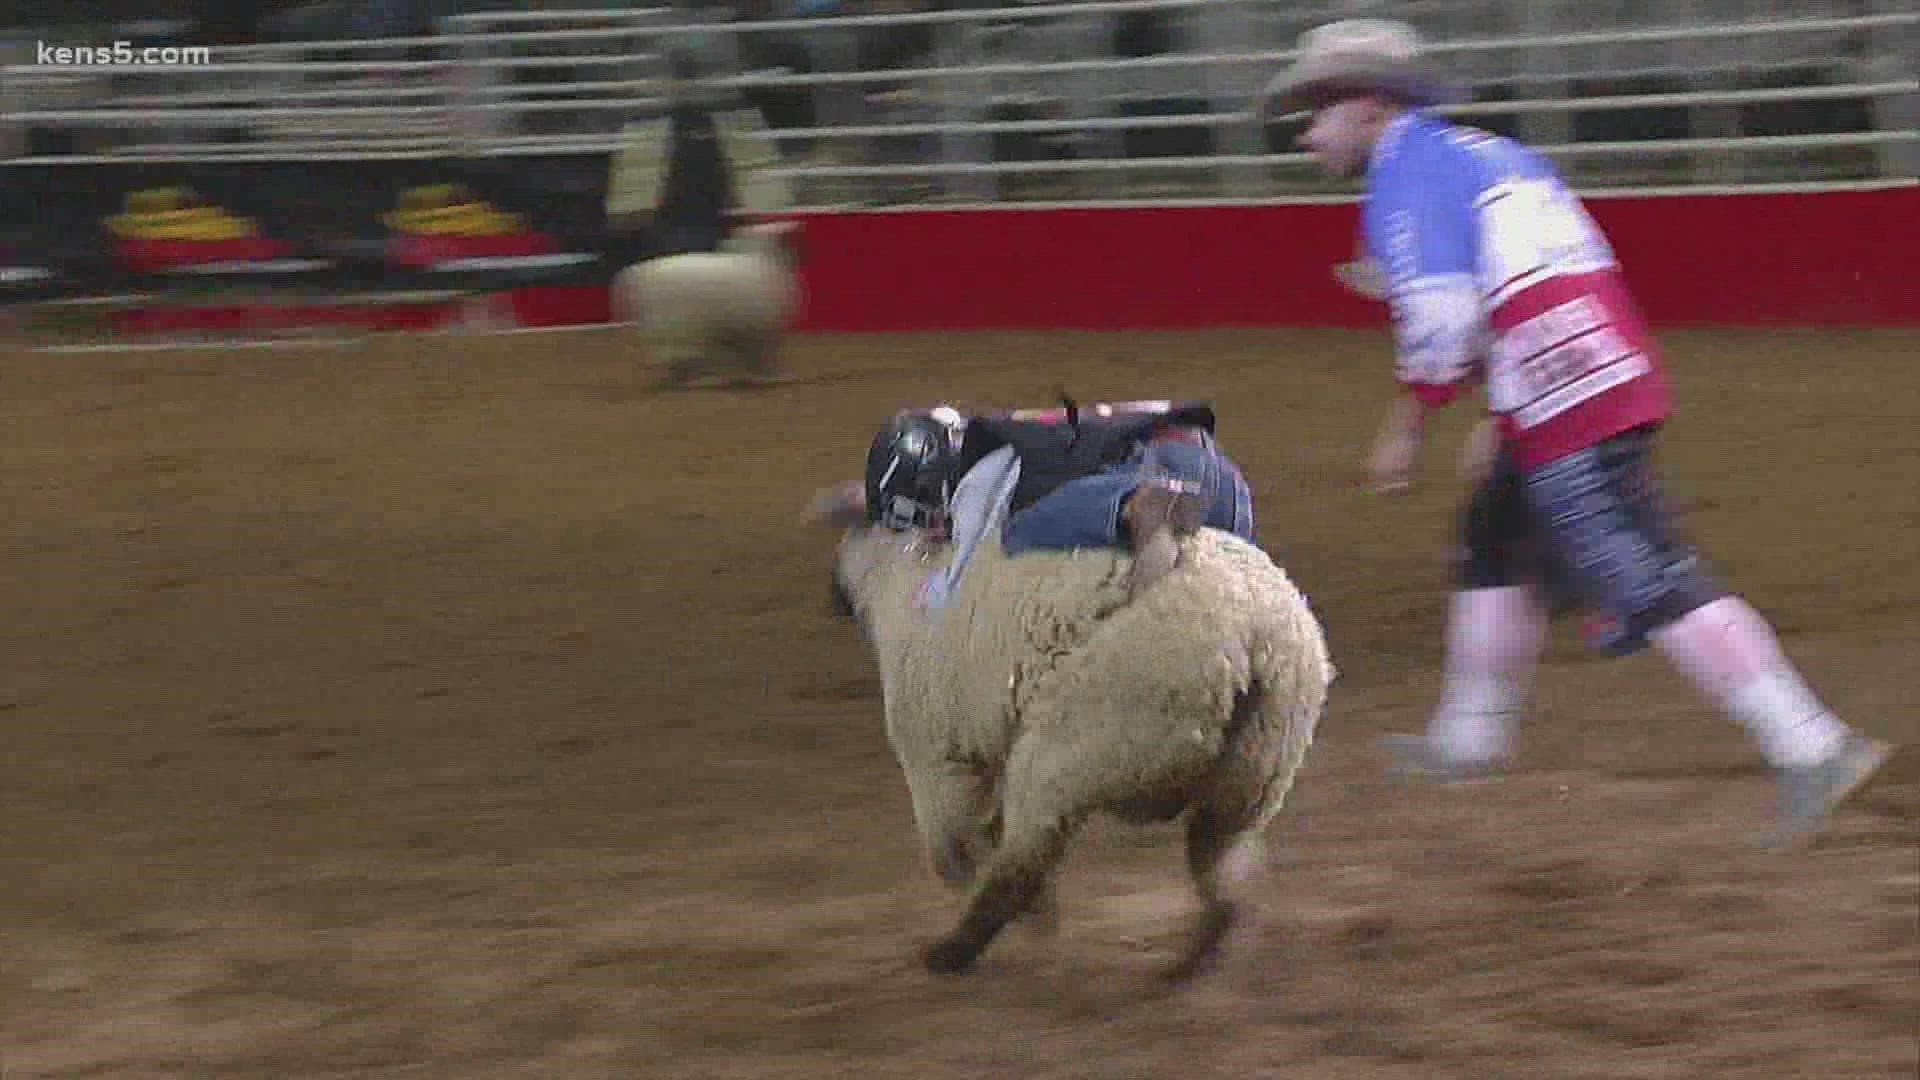 We've got the San Antonio Stock Show & Rodeo Mutton Busting video that is sure to make you smile.